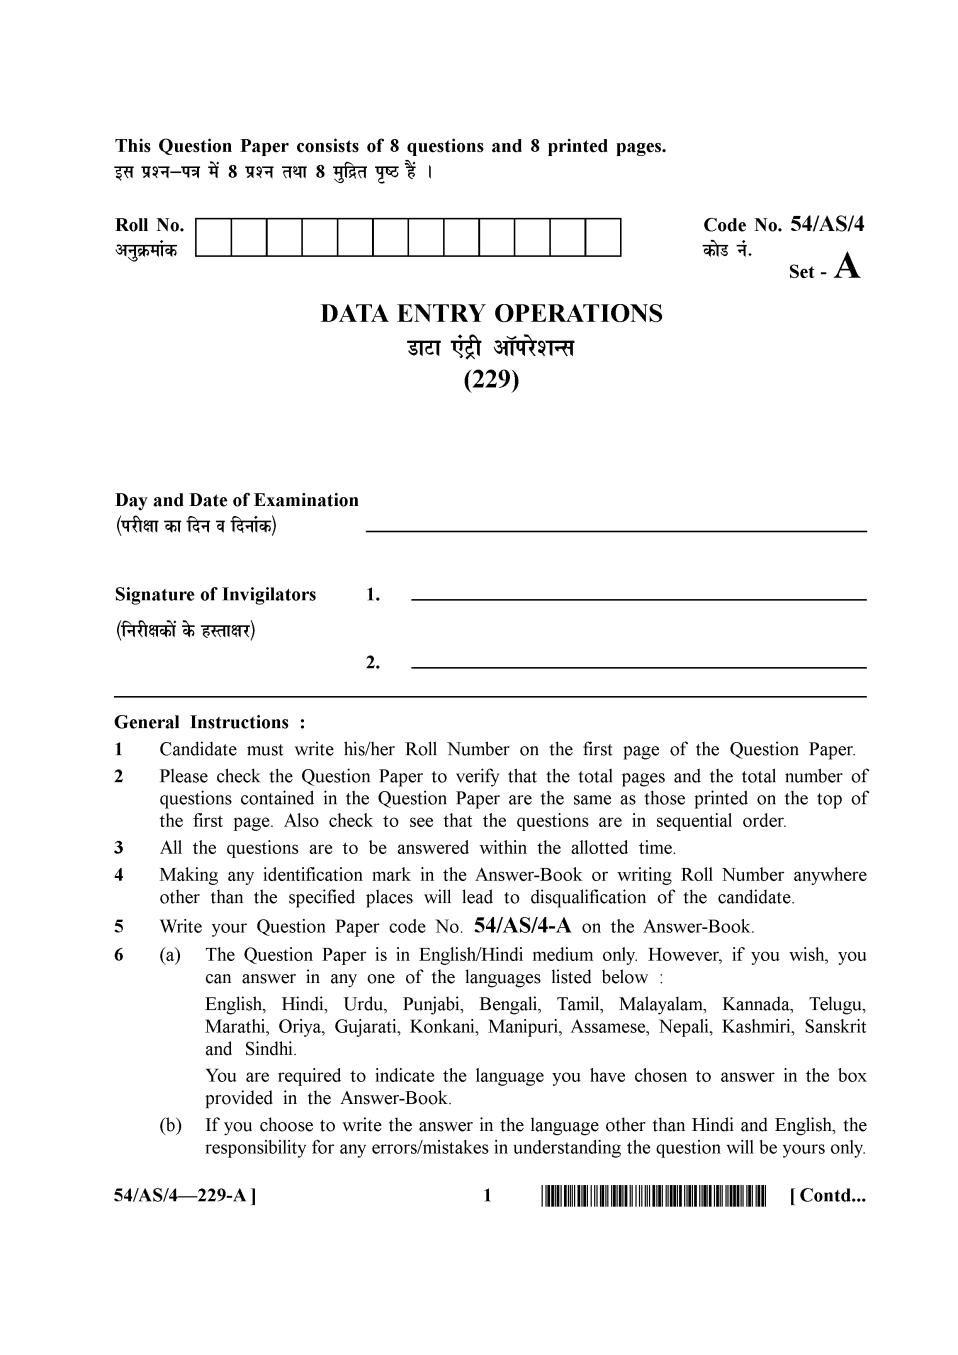 NIOS Class 10 Question Paper Apr 2017 - Data Entry Operations - Page 1